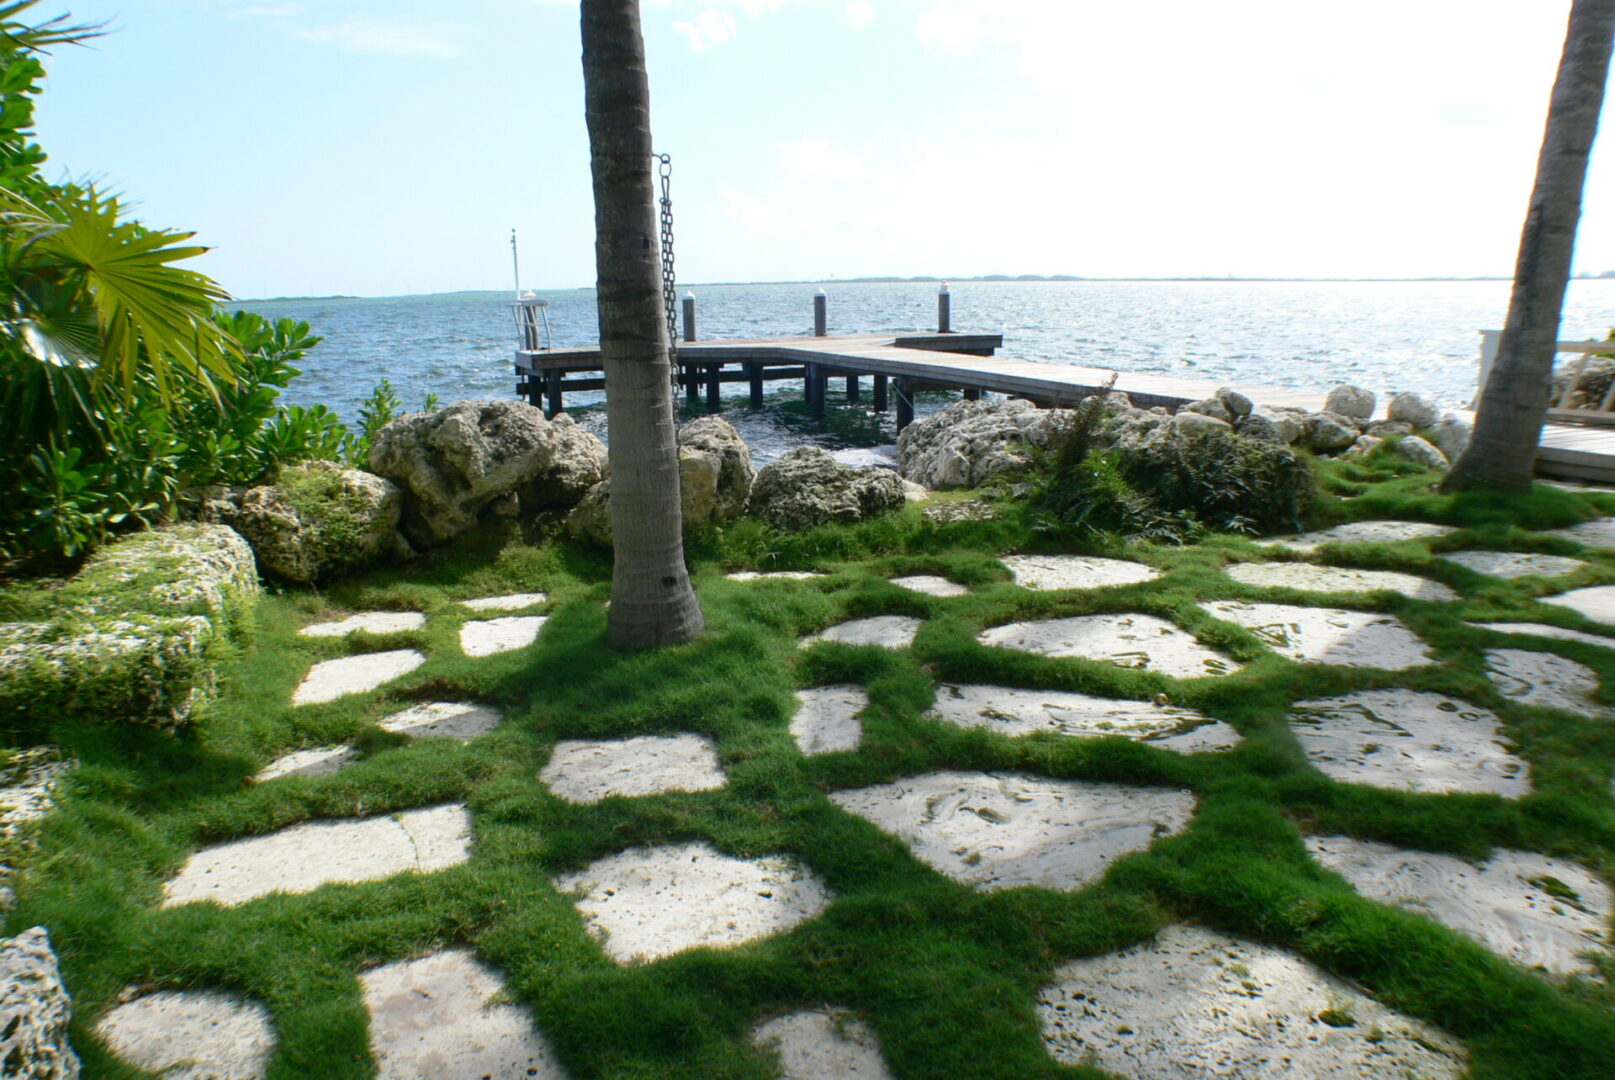 A walkway with grass and rocks next to the water.